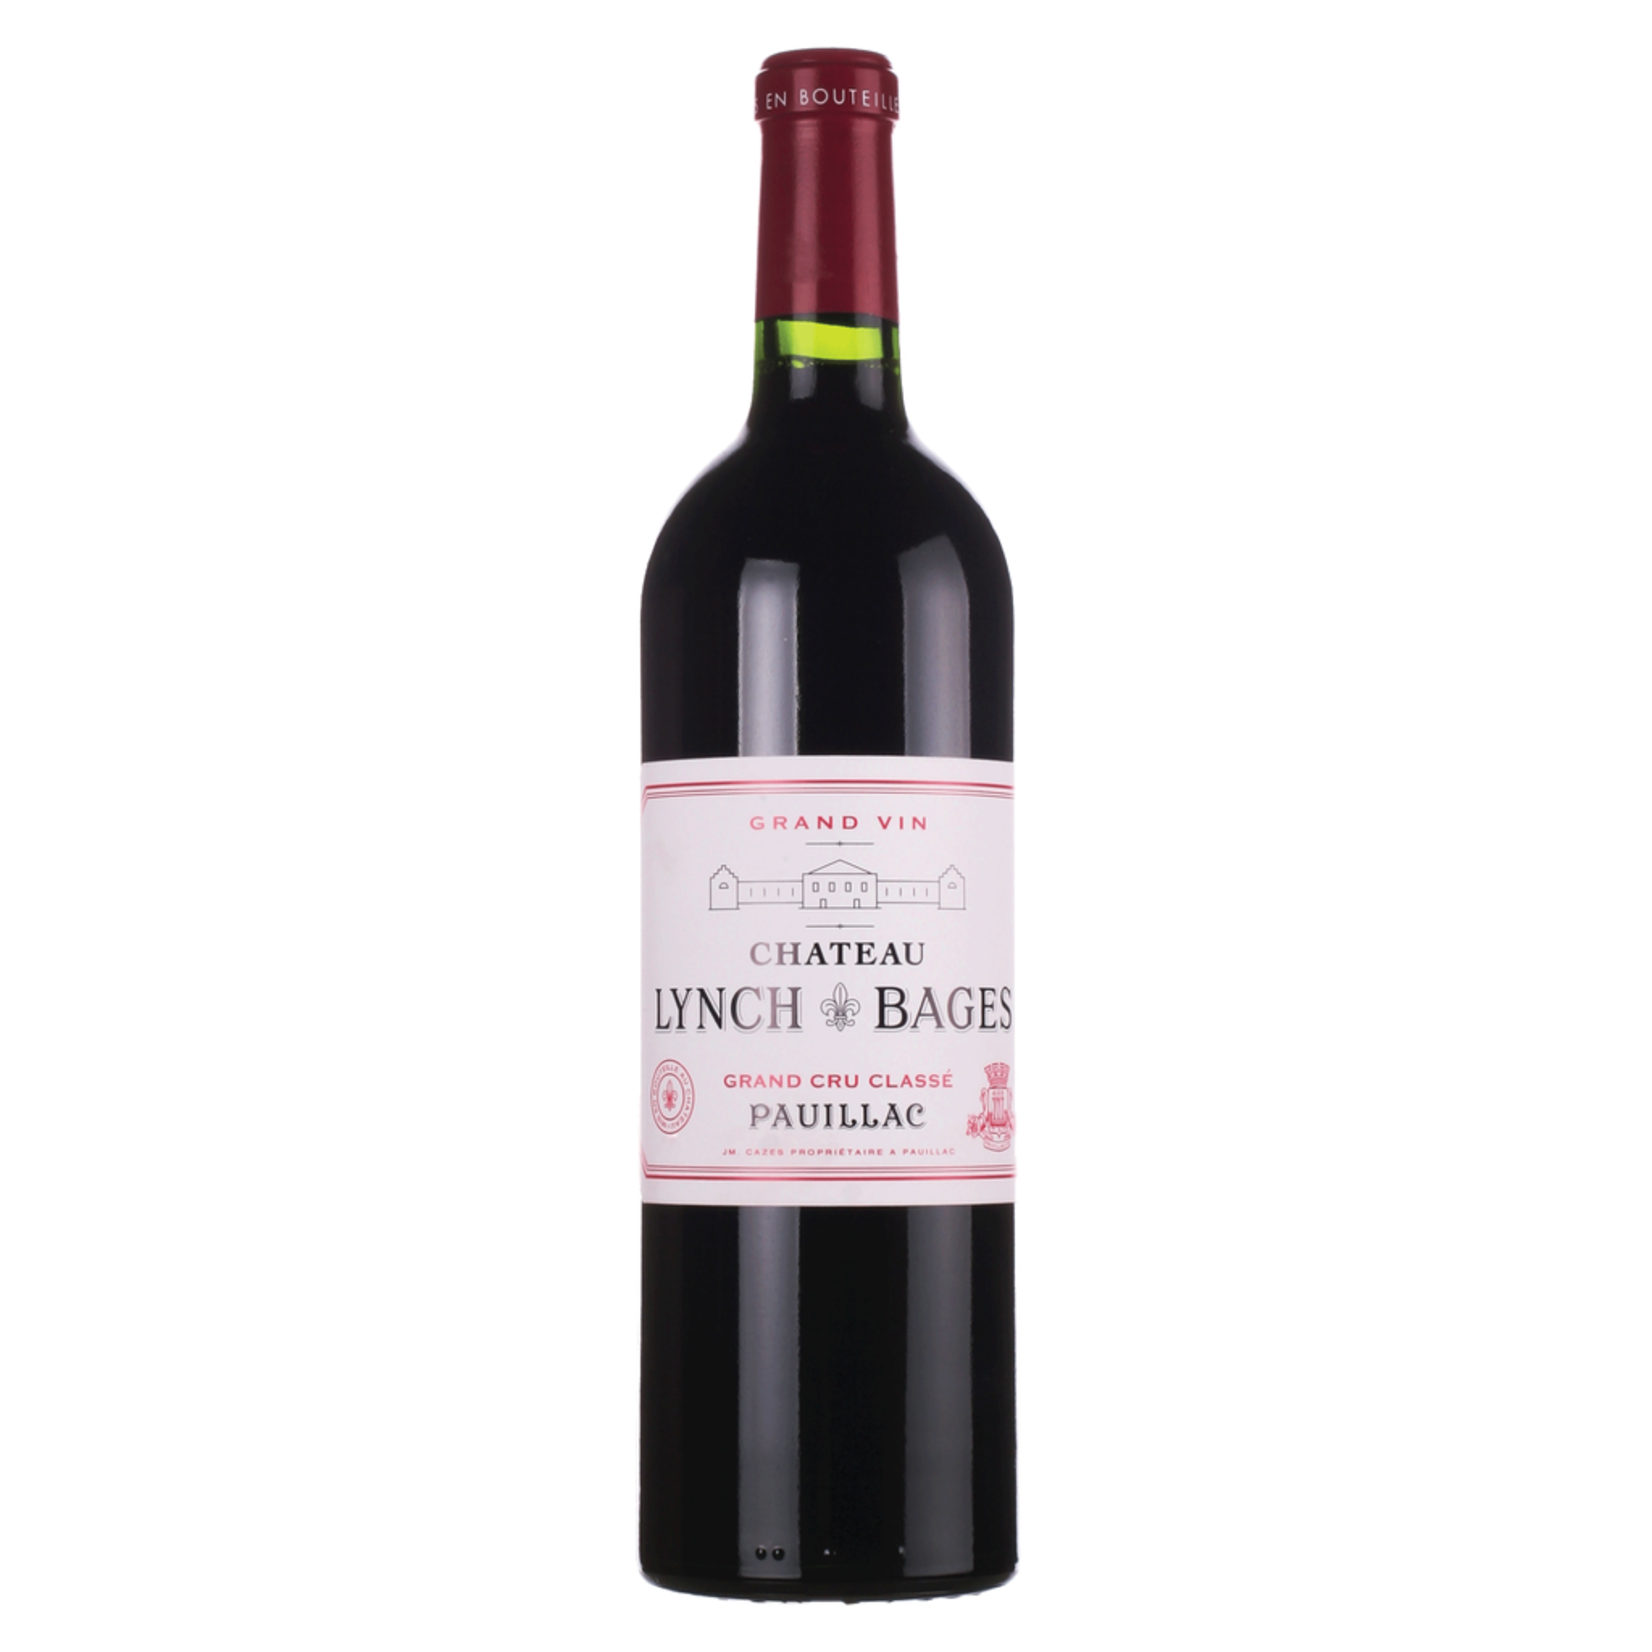 Wine Chateau Lynch Bages Pauillac 2000